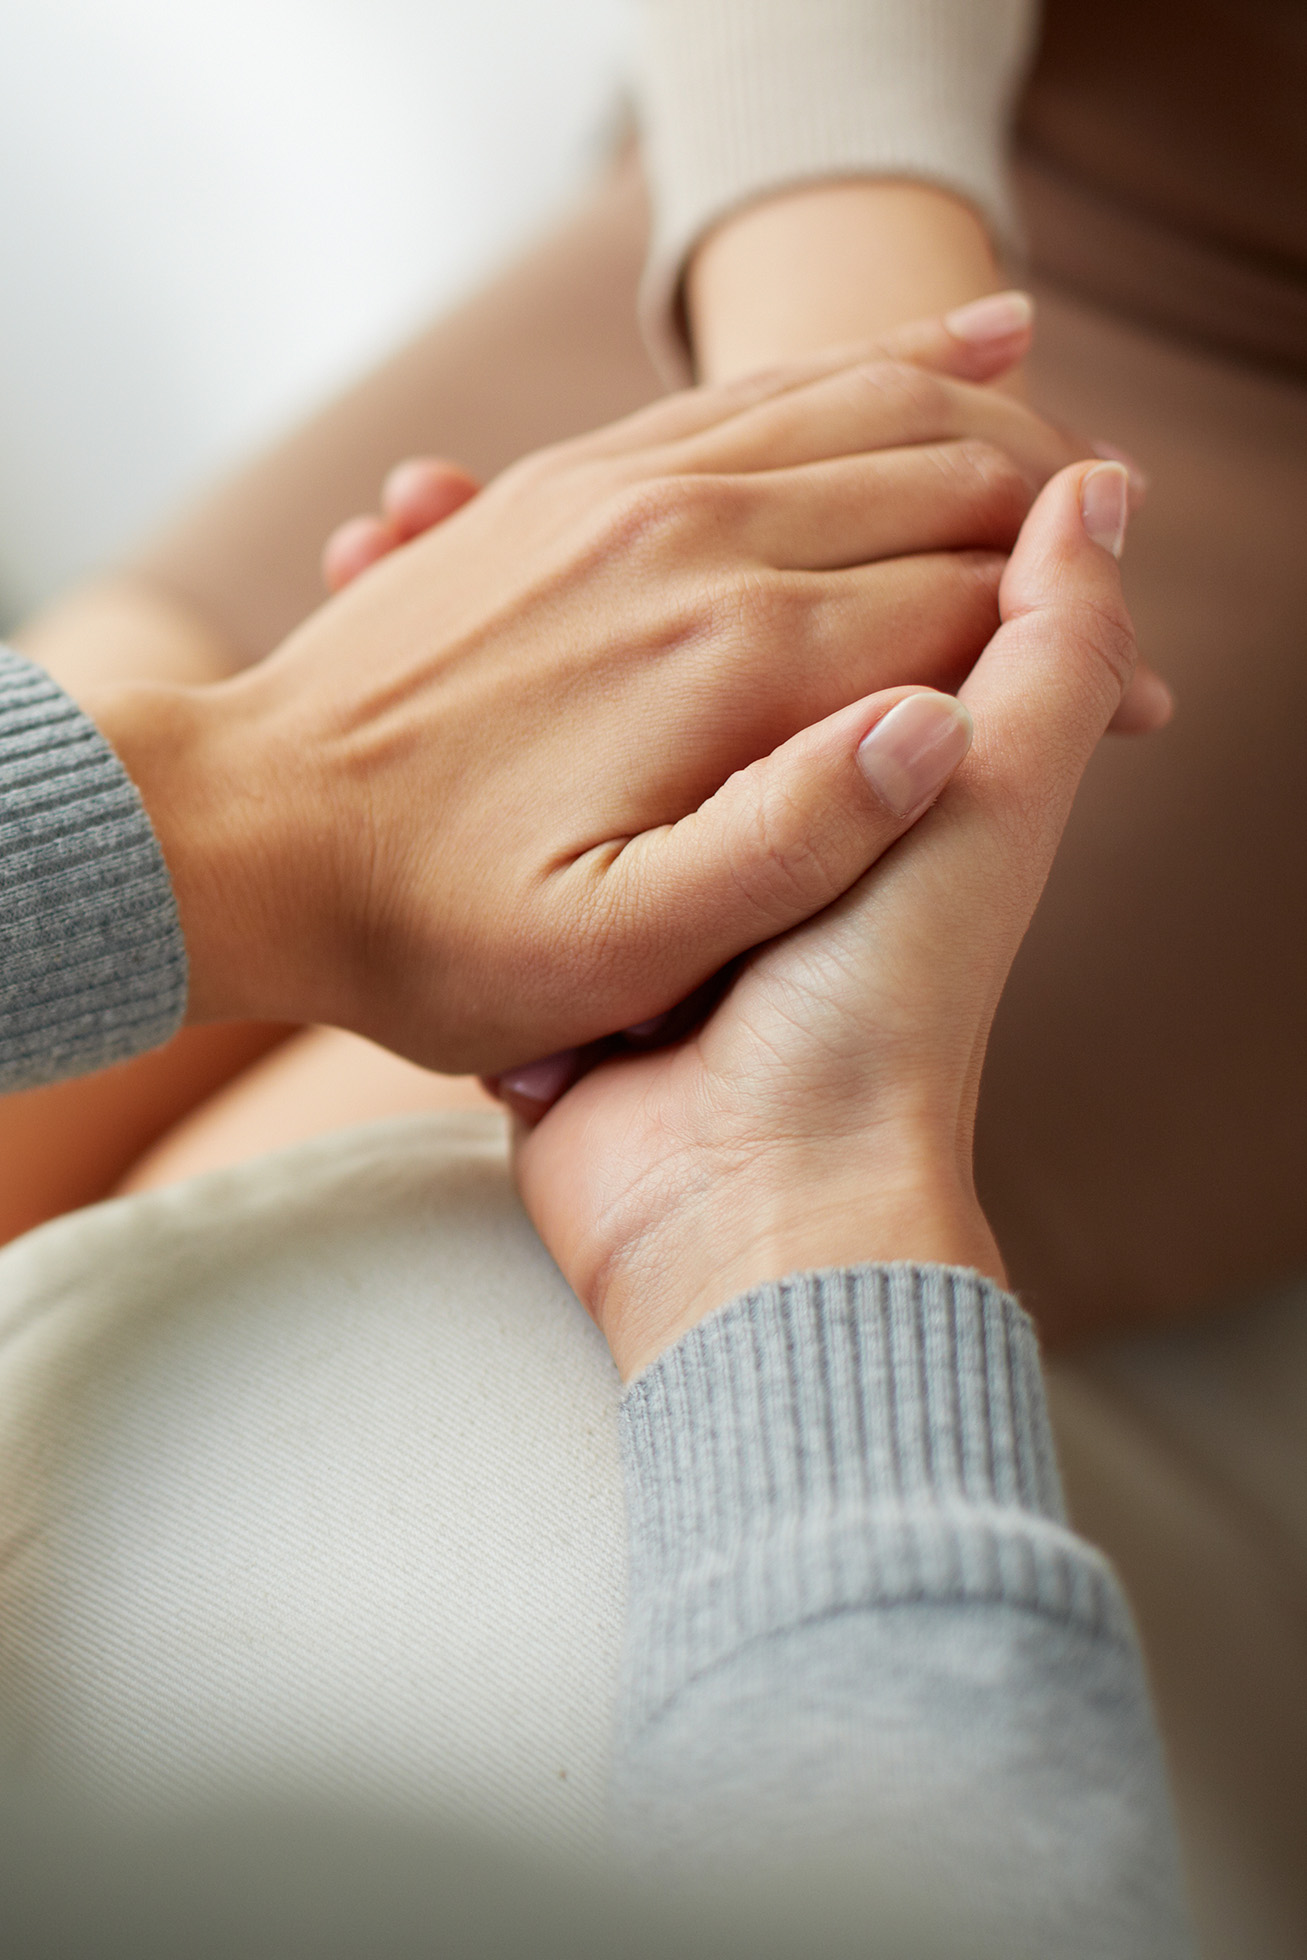 Image of women holding hands in a caring manner